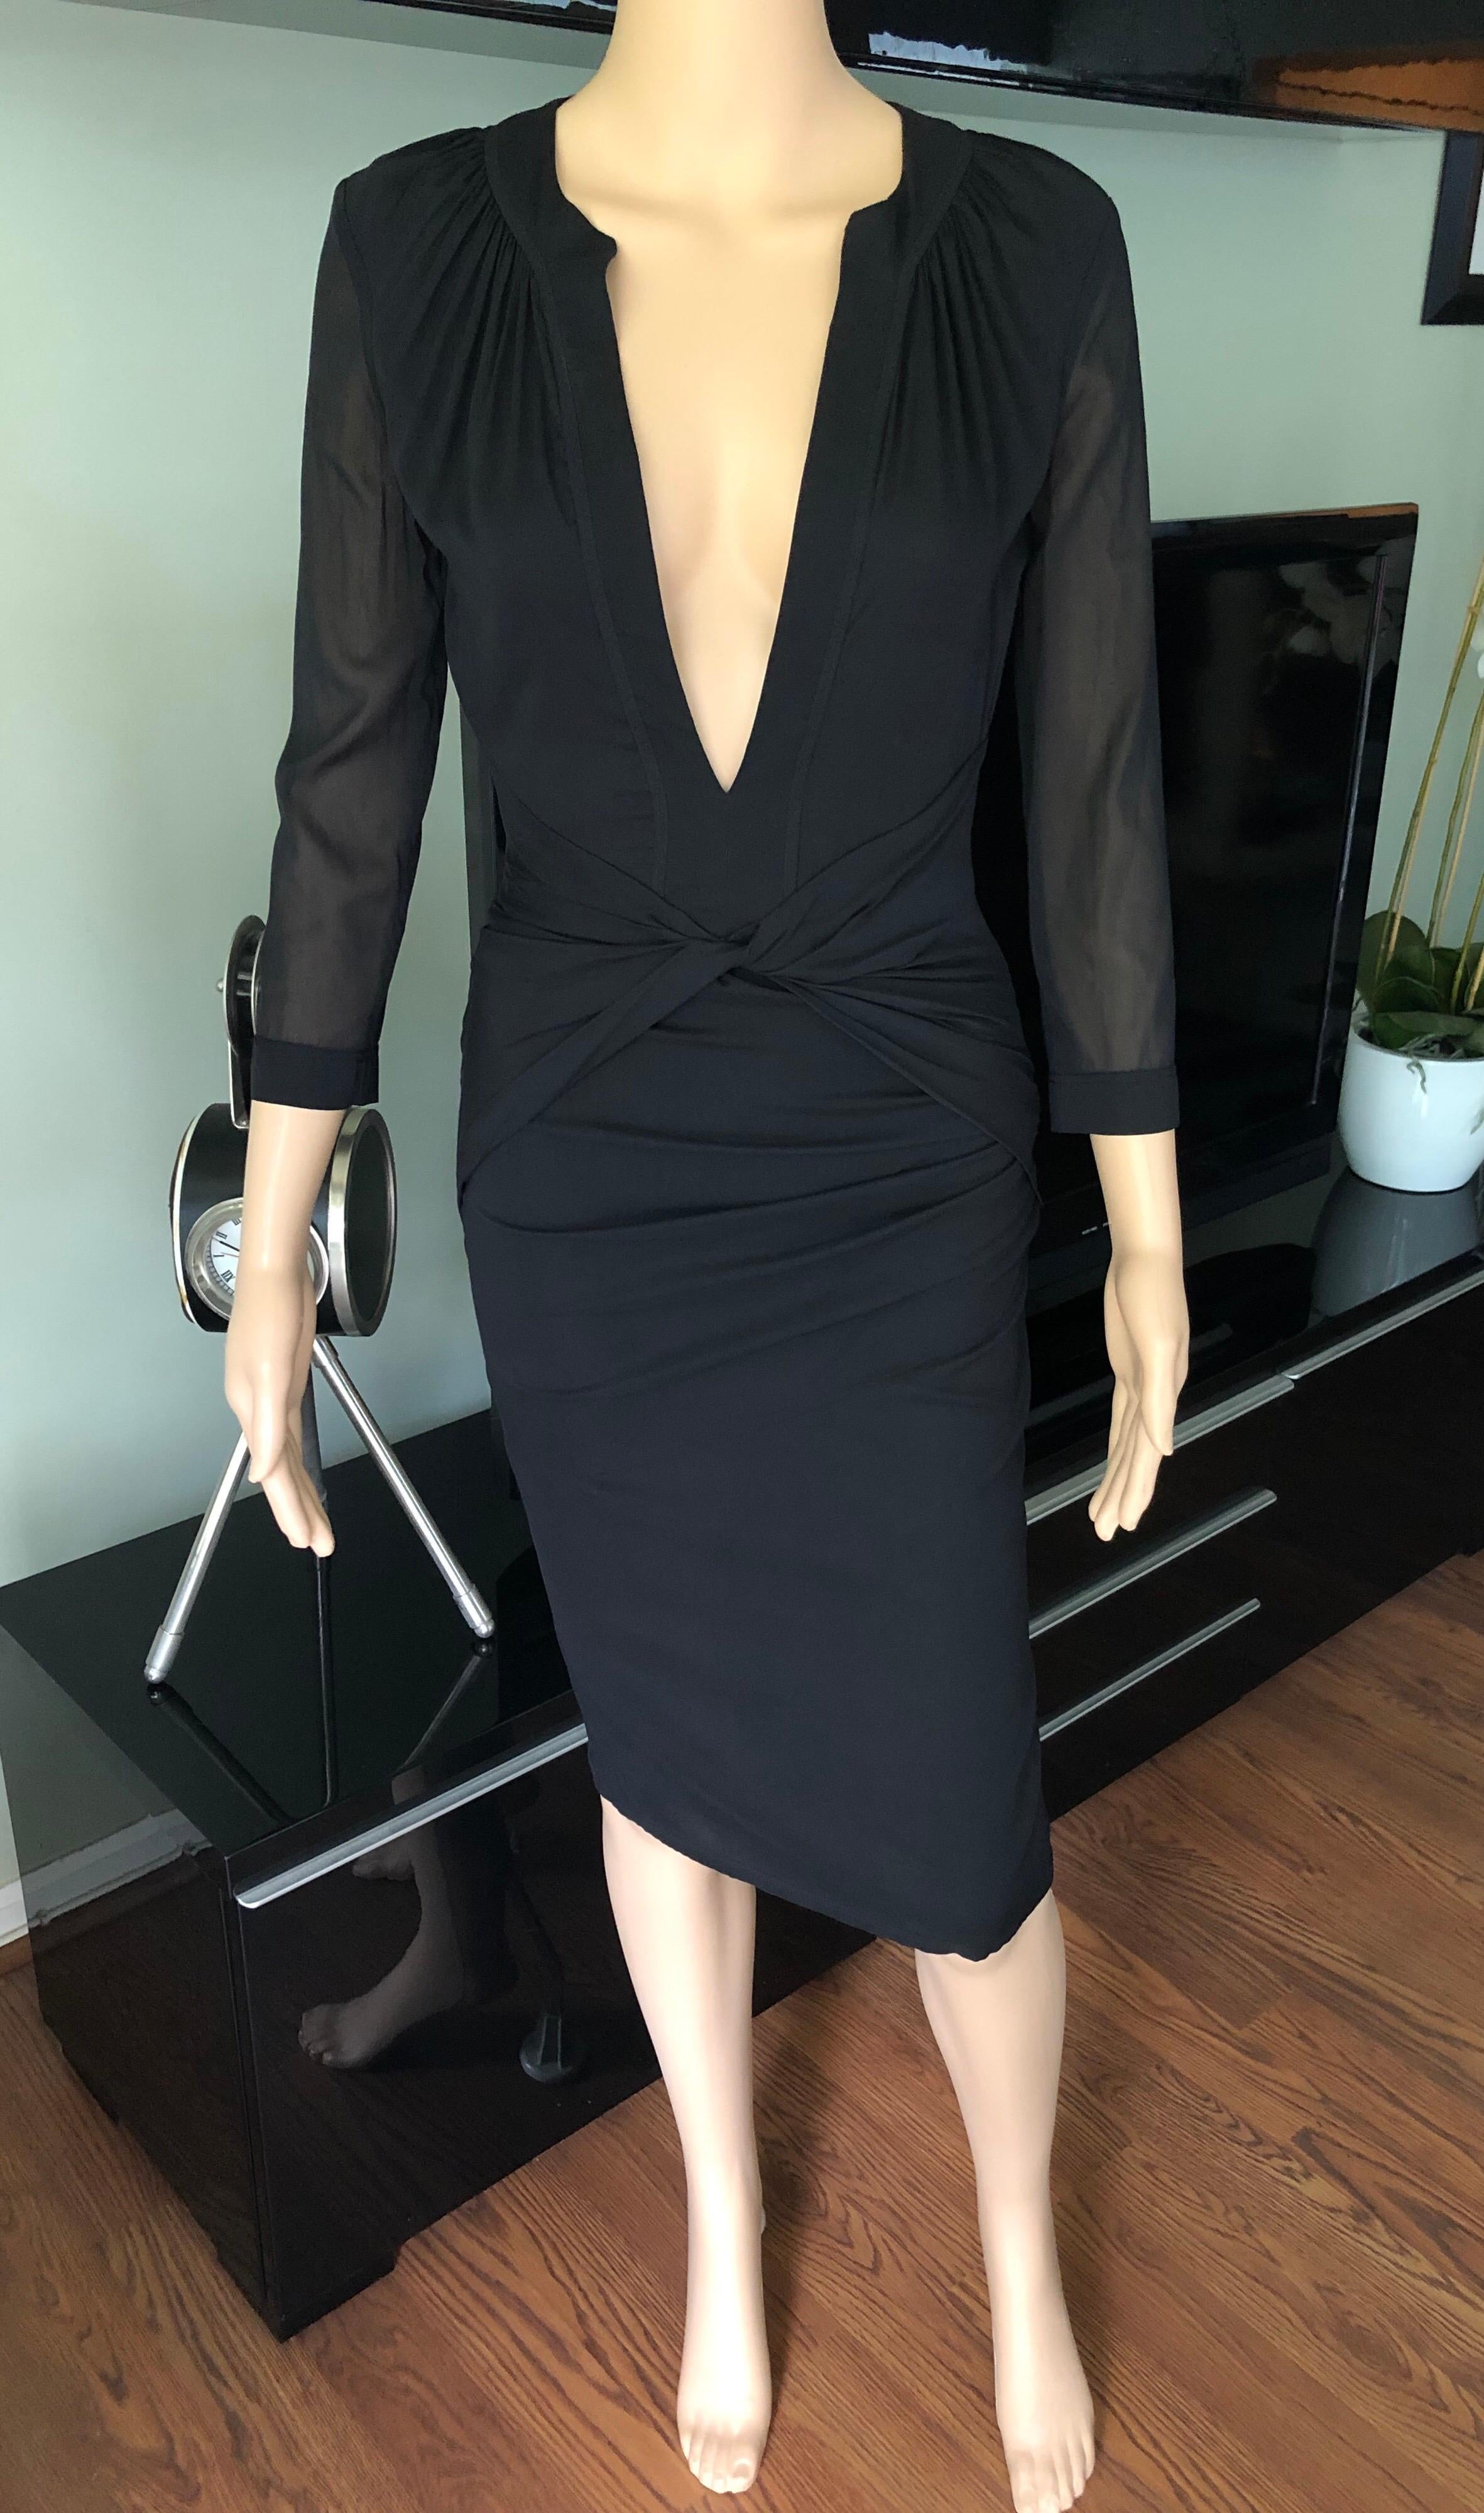 Tom Ford for Gucci 2004 Plunging Neckline Sheer Panels Silk Black Dress IT 38

Gucci black dress featuring plunging neckline , ruching accents at front, sheer sleeves and panels in the back and concealed zip closure at side. 
